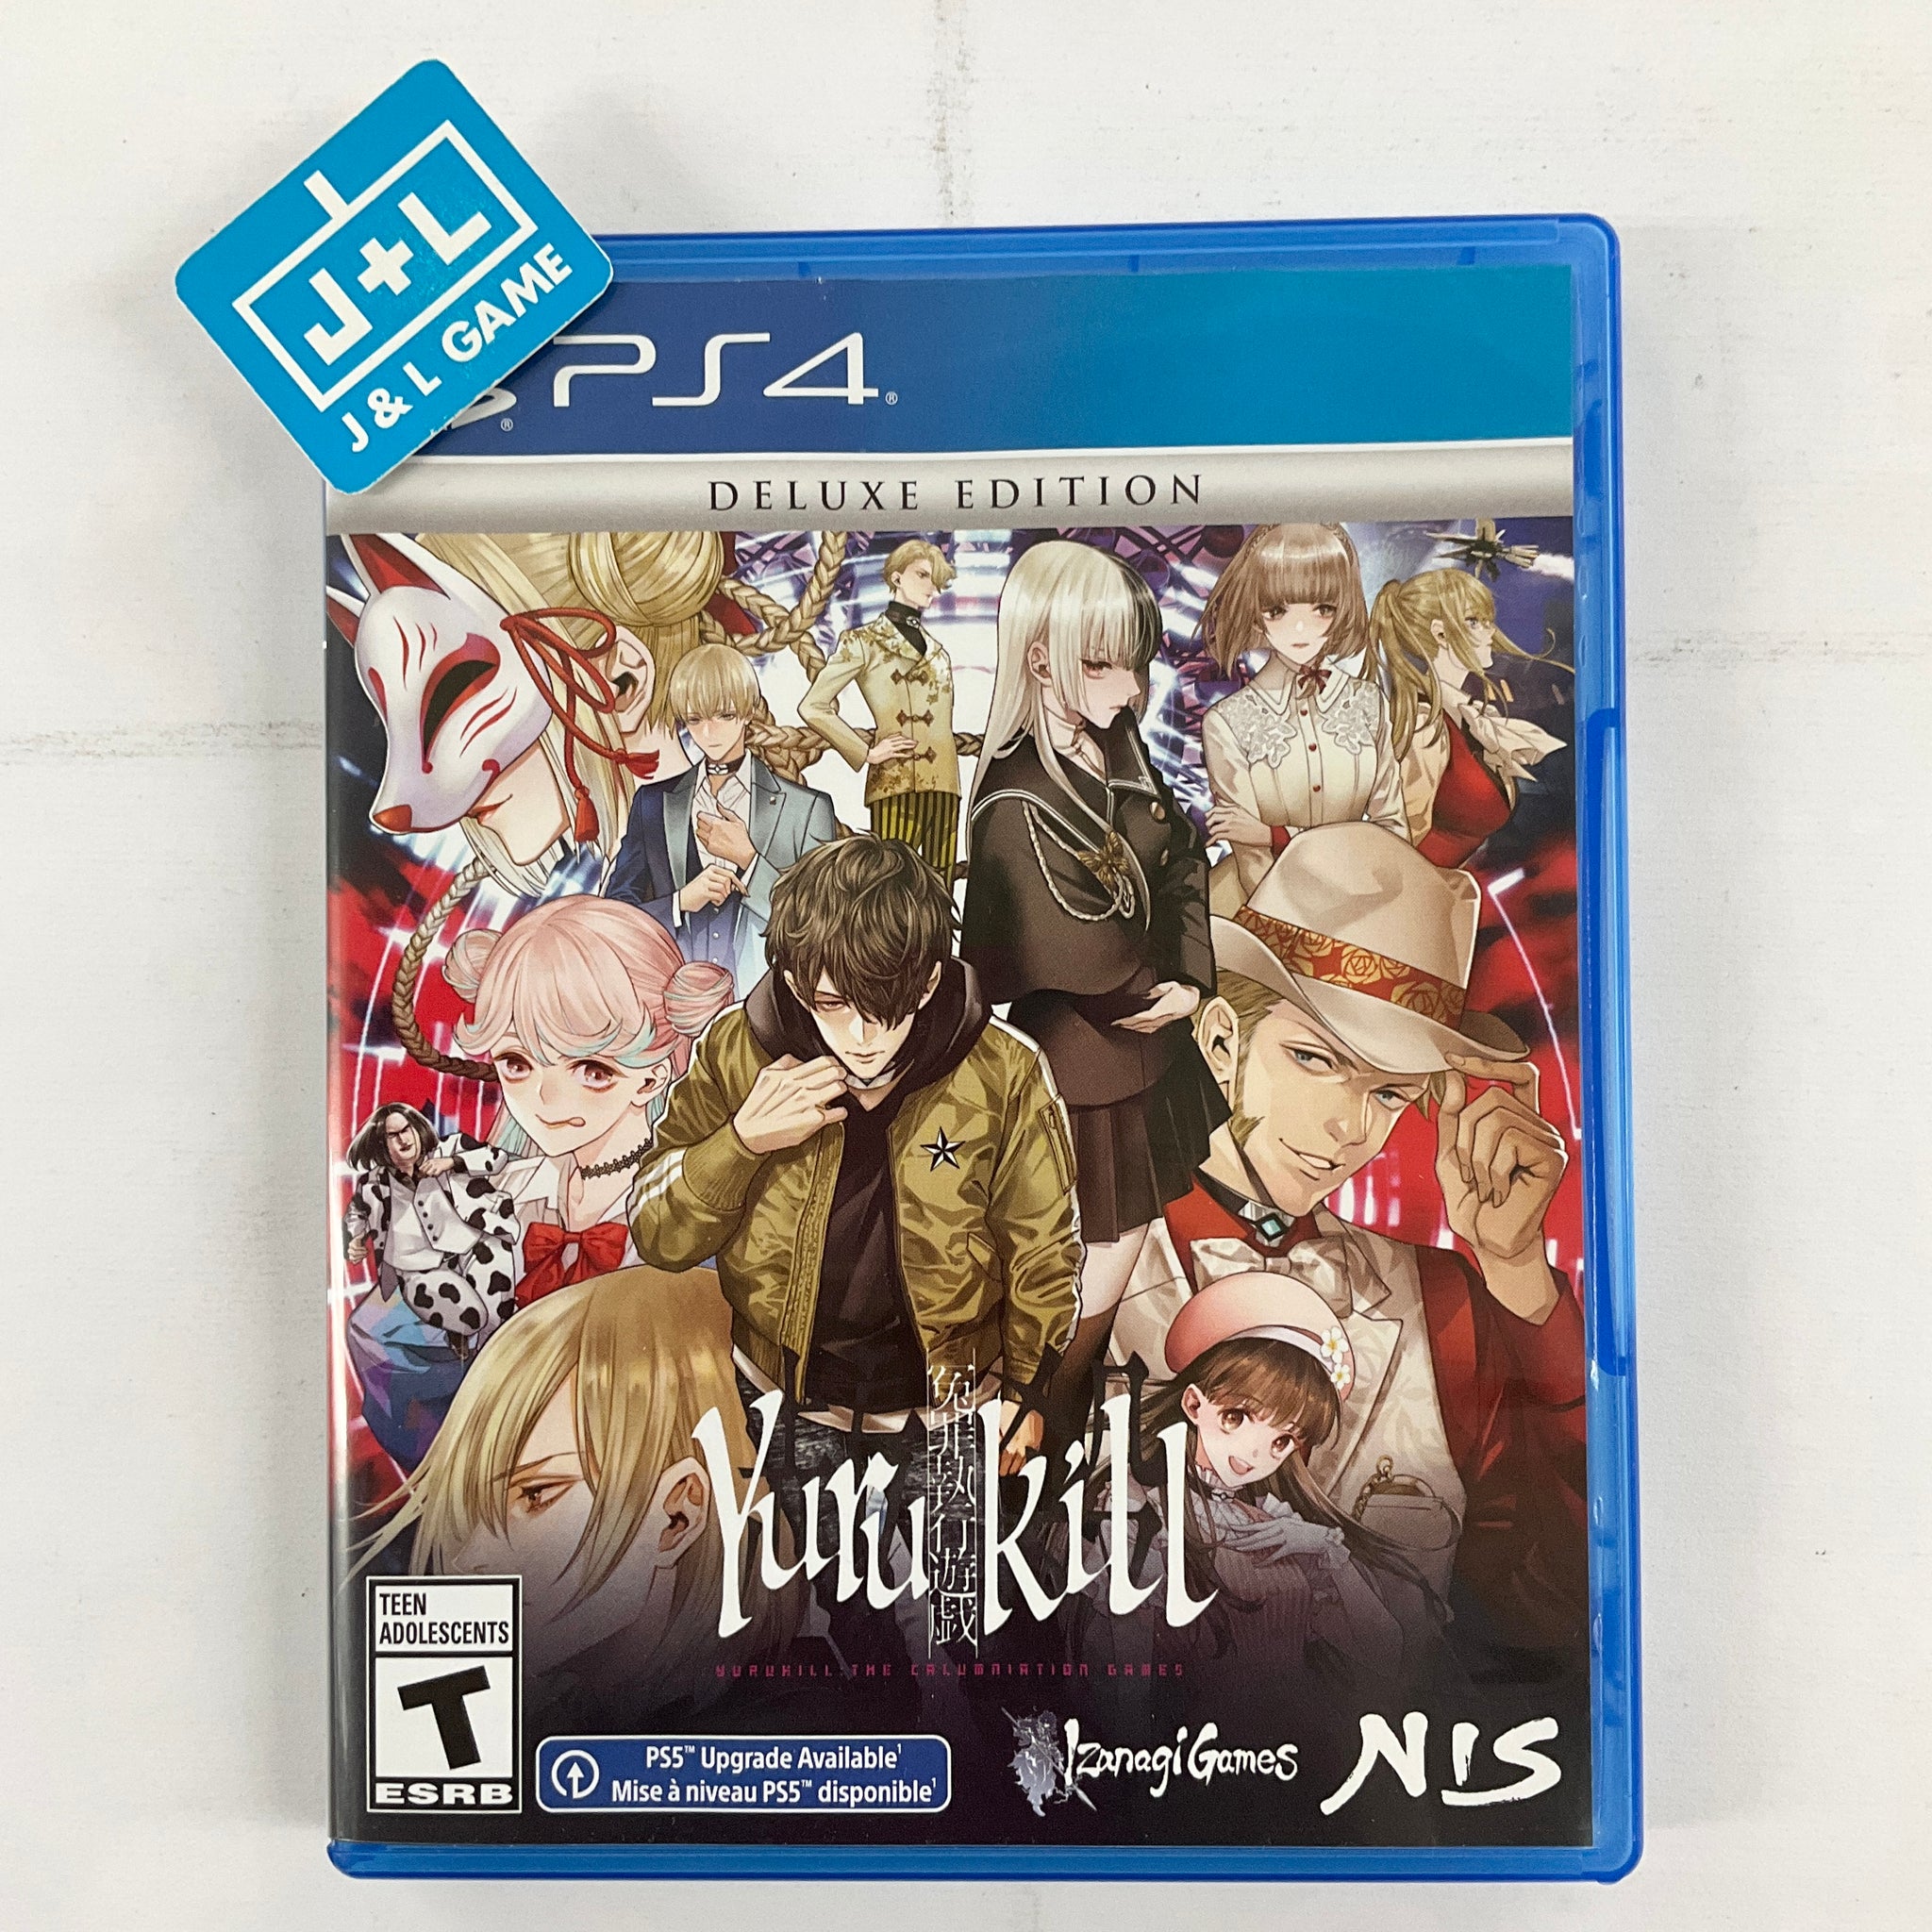 Yurukill: The Calumniation Games (Deluxe Edition) - (PS4) PlayStation 4 [UNBOXING] Video Games NIS America   